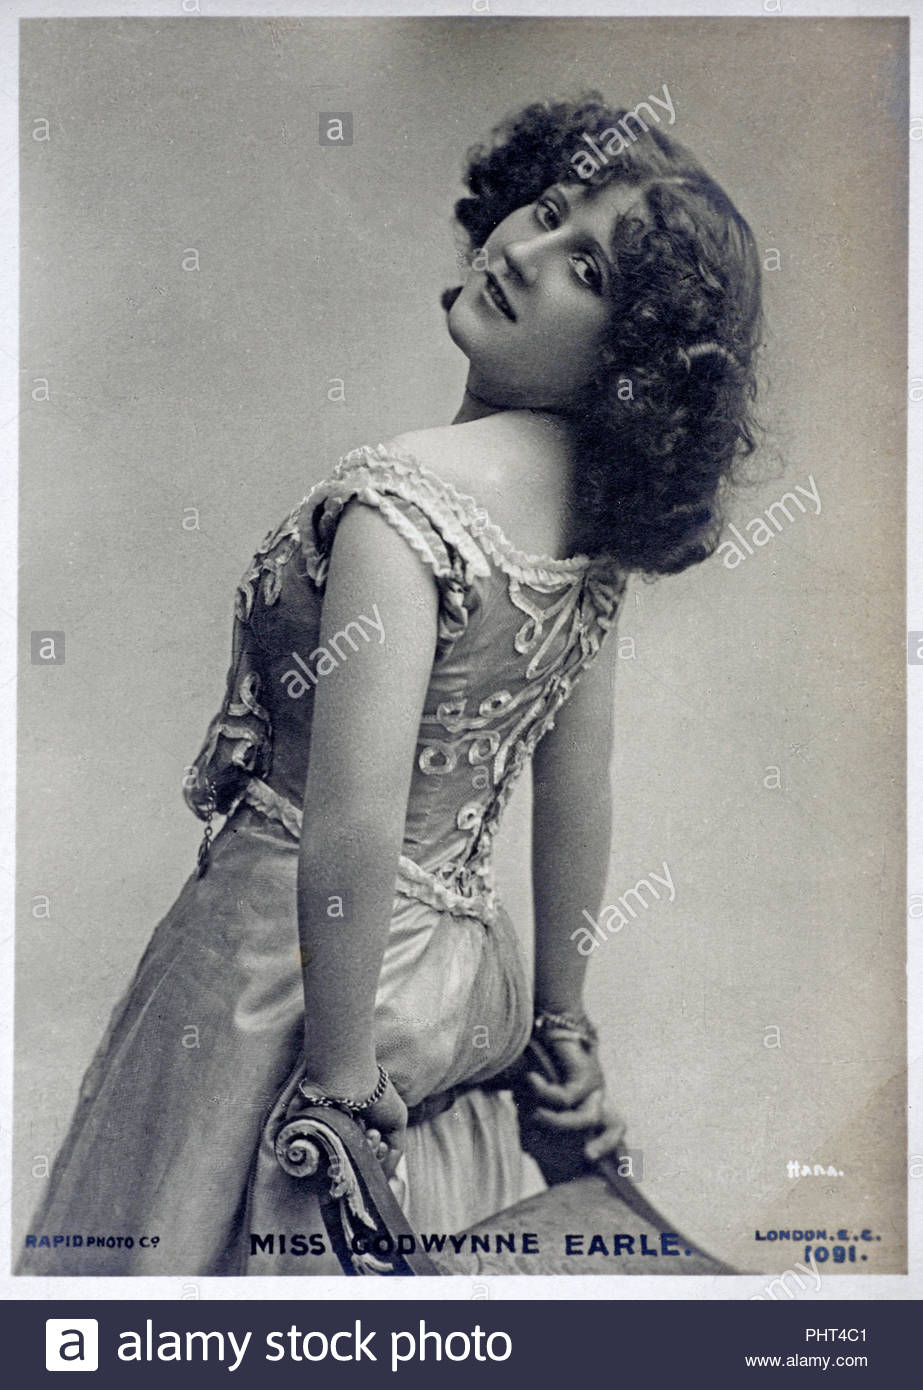 Godwynne Earle portrait, was an American actress, dancer and singer, vintage real photograph postcard from 1905 Stock Photo